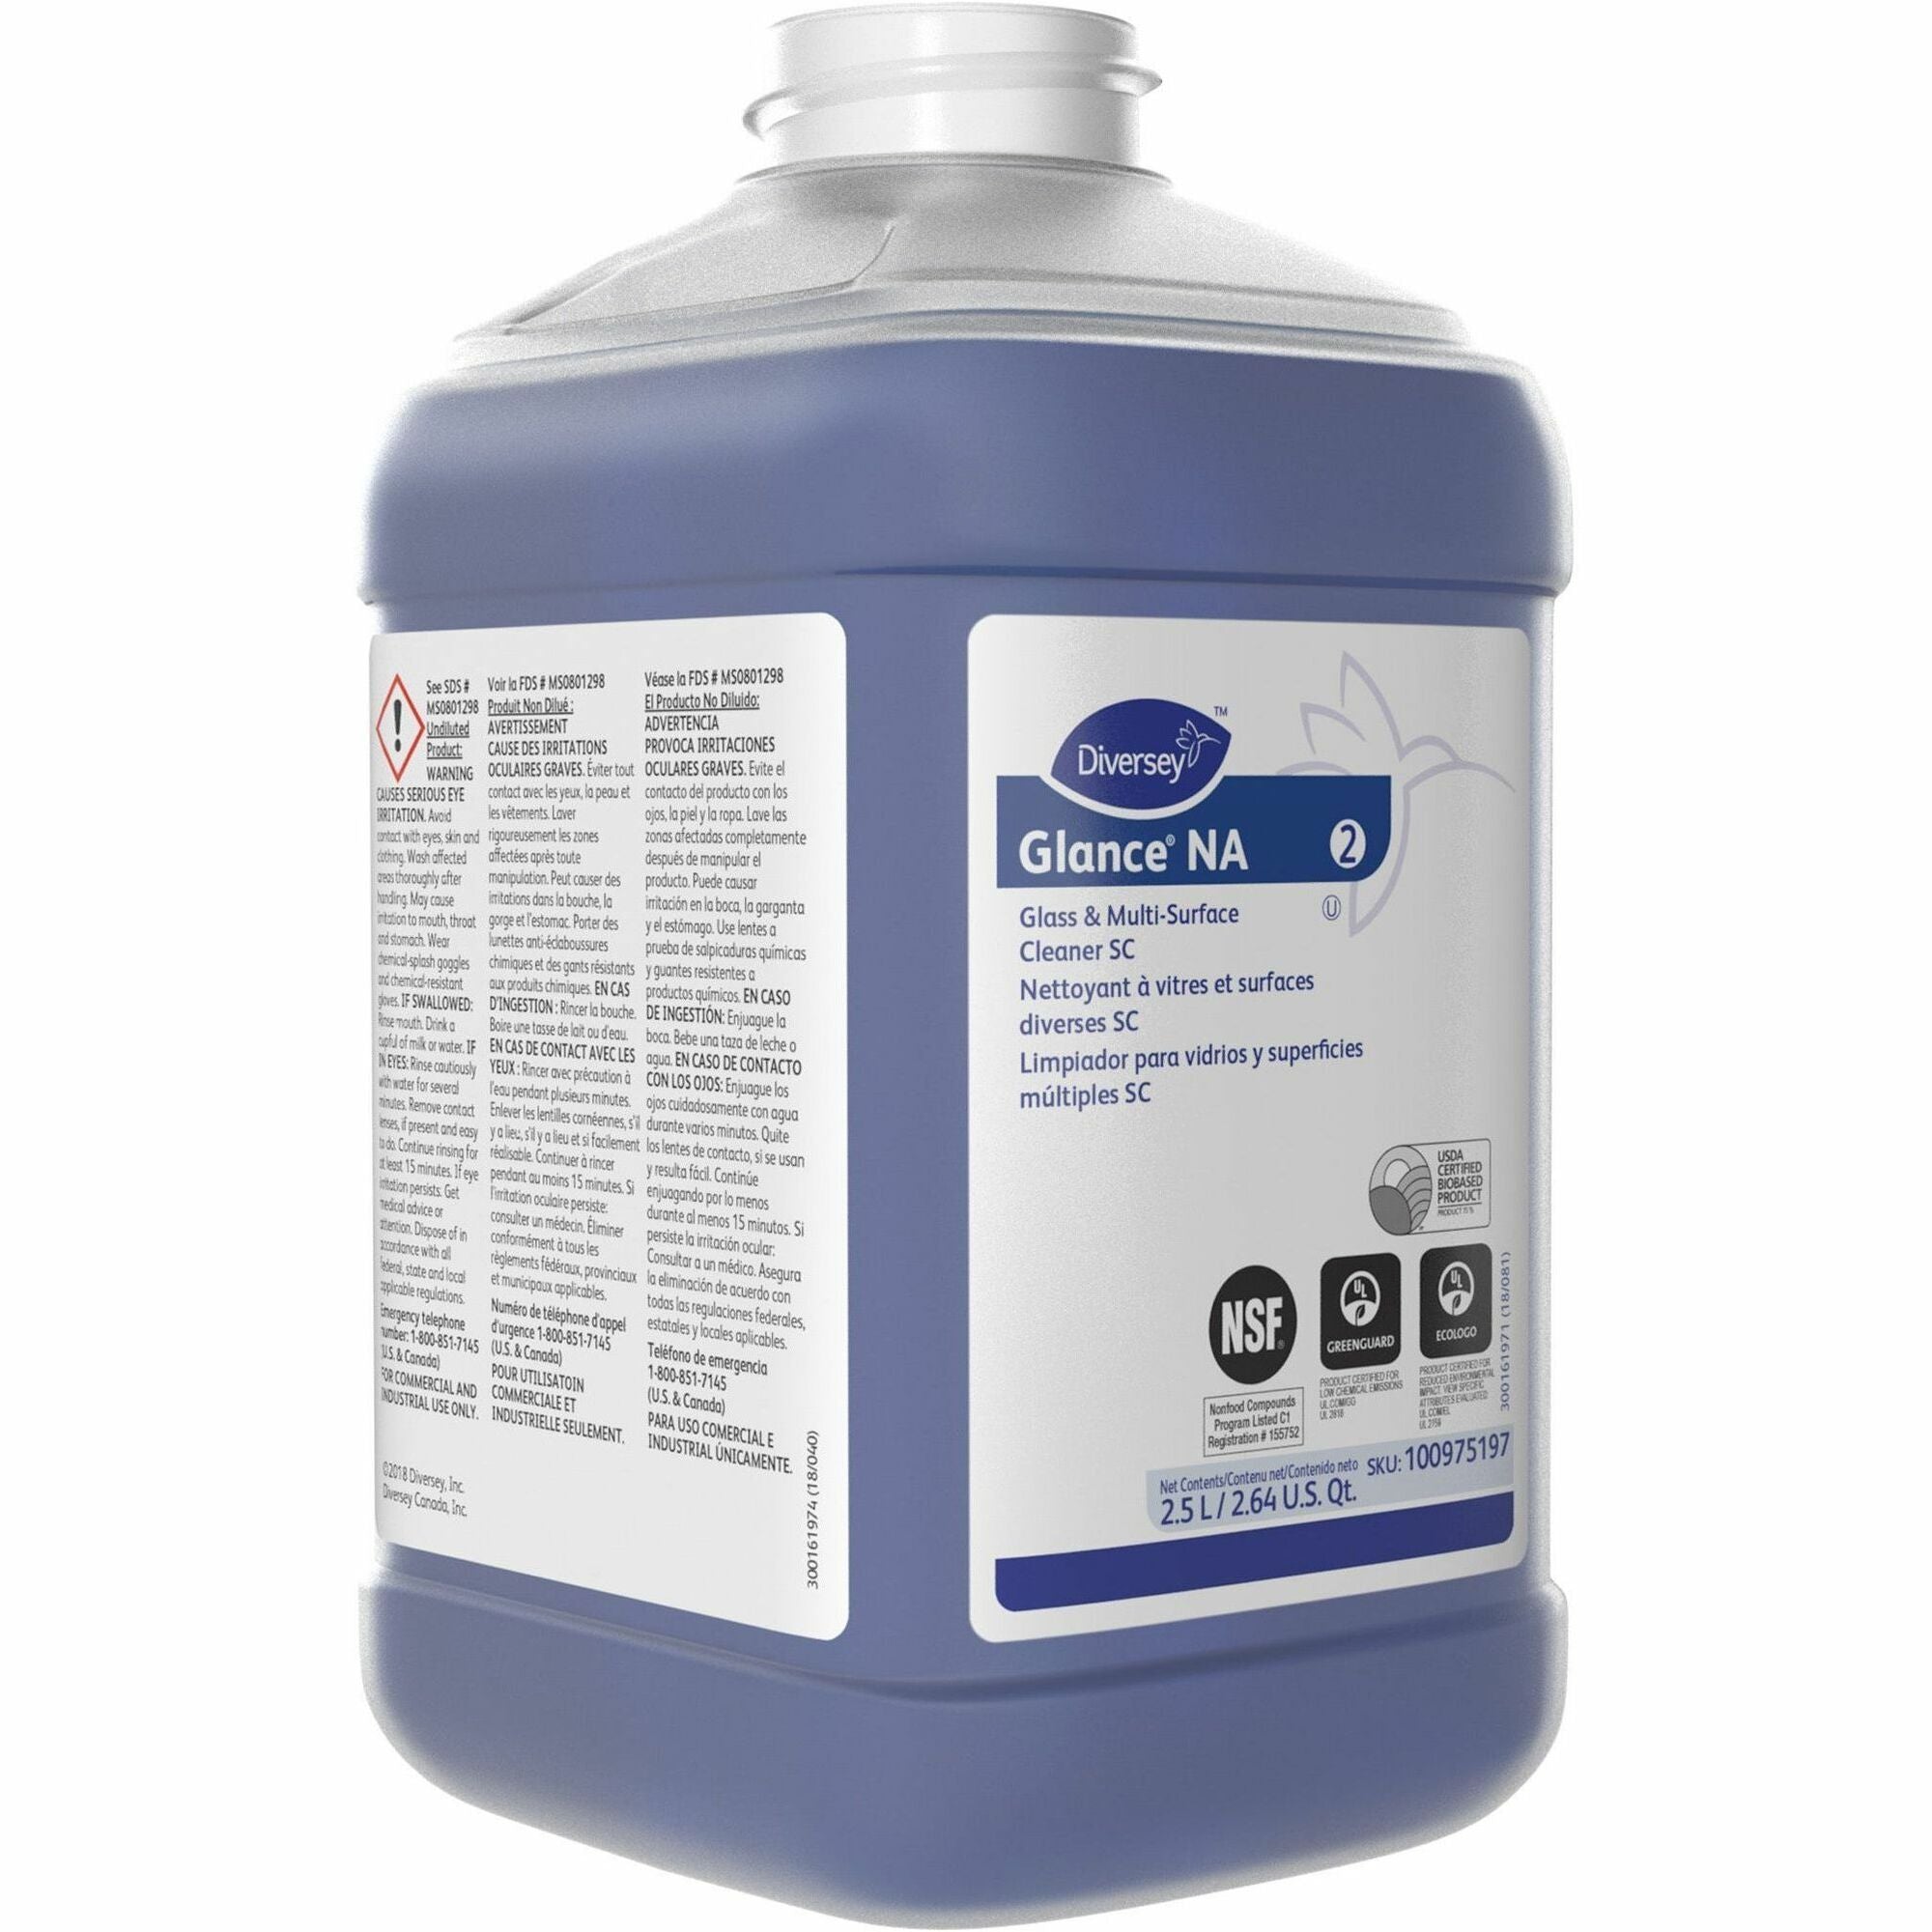 diversey-glass-multi-purpose-cleaner-concentrate-845-fl-oz-26-quart-1-each-non-ammoniated-streak-free-quick-drying-non-smearing-fragrance-free-dilutable-odorless-kosher-blue_dvo100975197 - 1